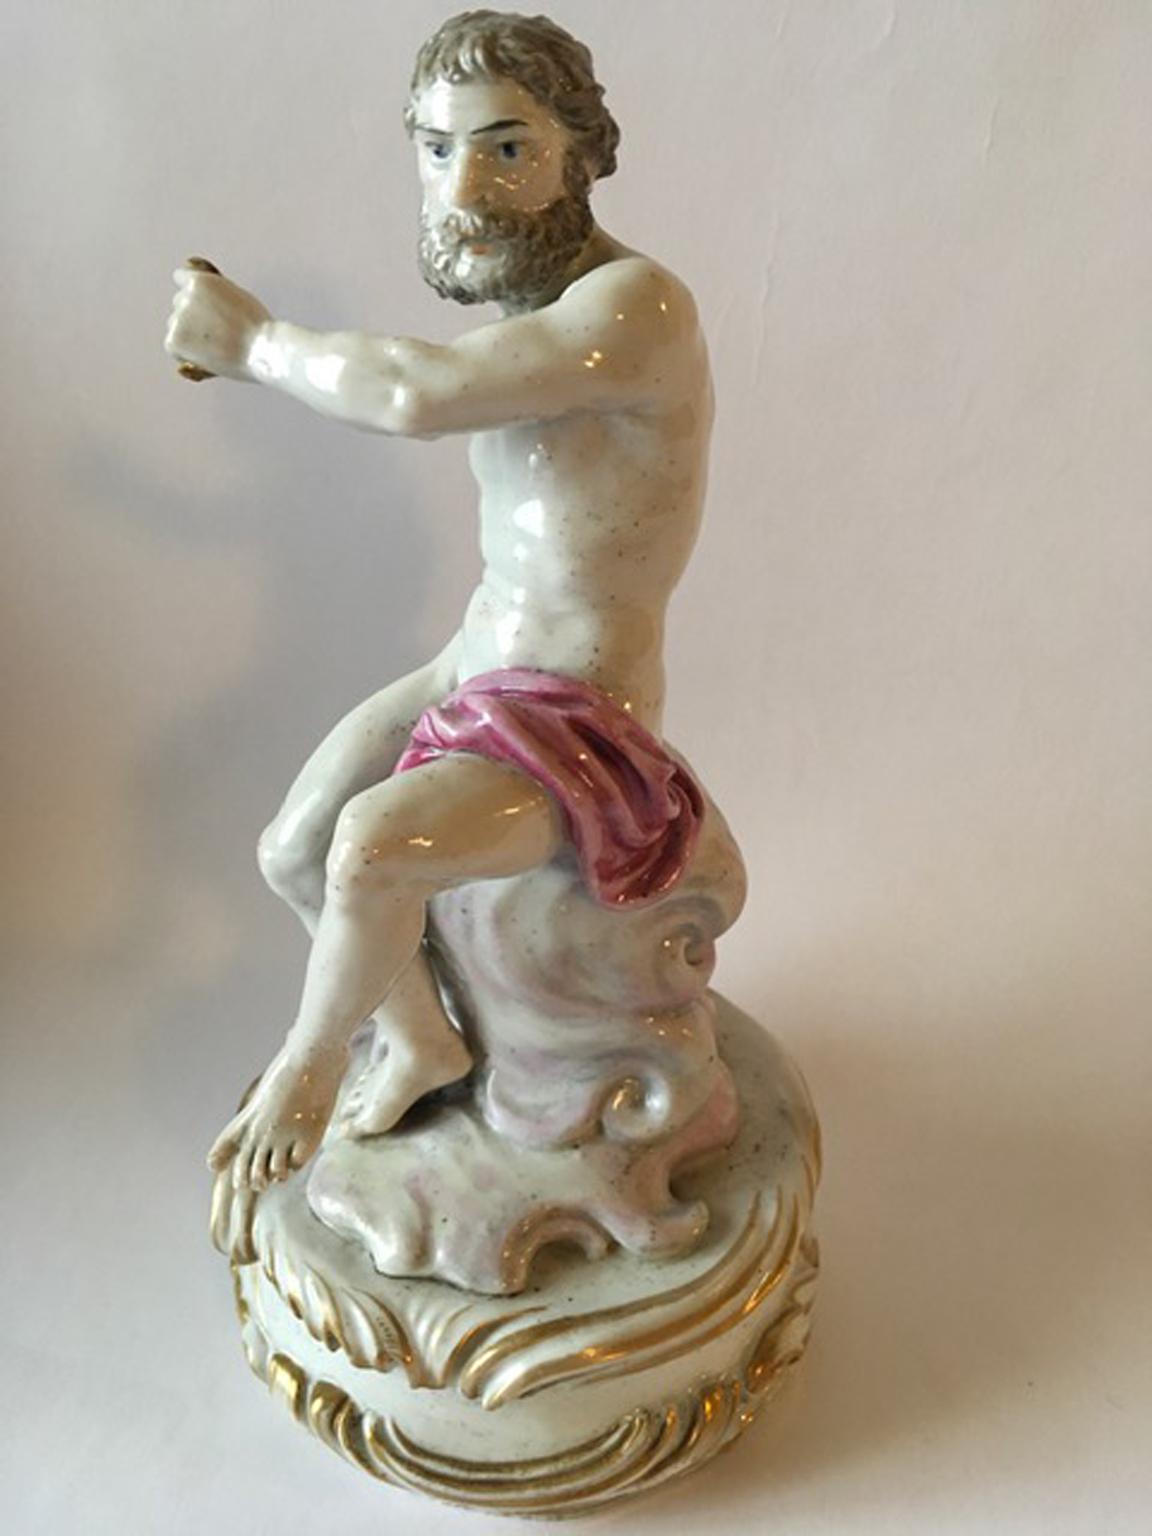 Hand-Crafted Europe 18th Century Attribuited to Meissen Porcelain Giove Figurine For Sale